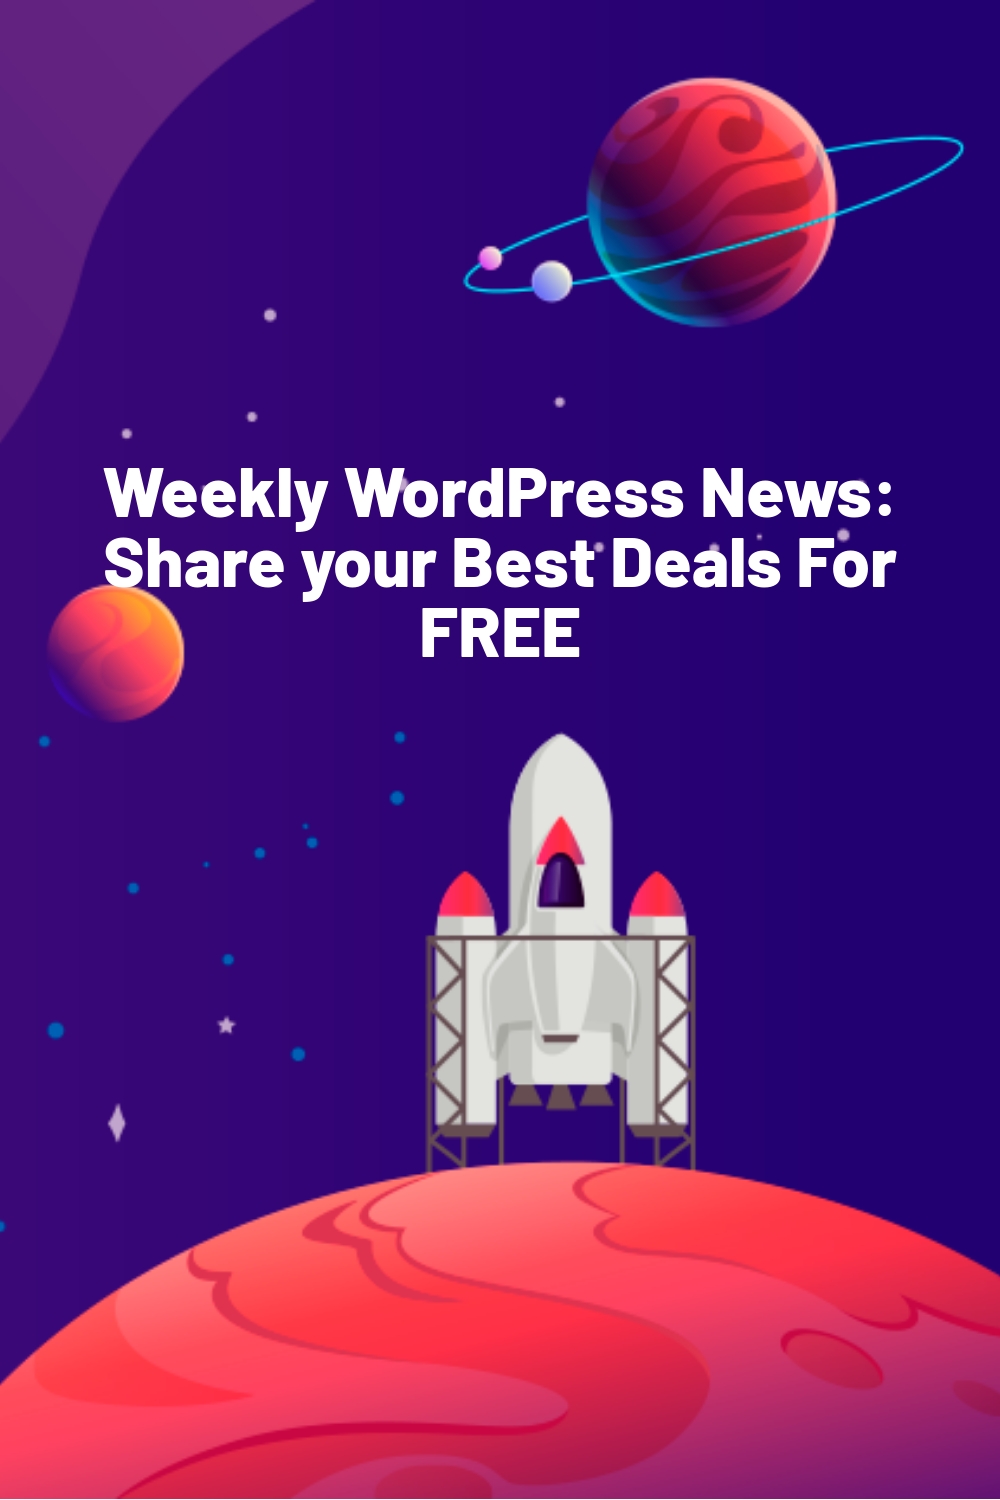 Weekly WordPress News: Share your Best Deals For FREE